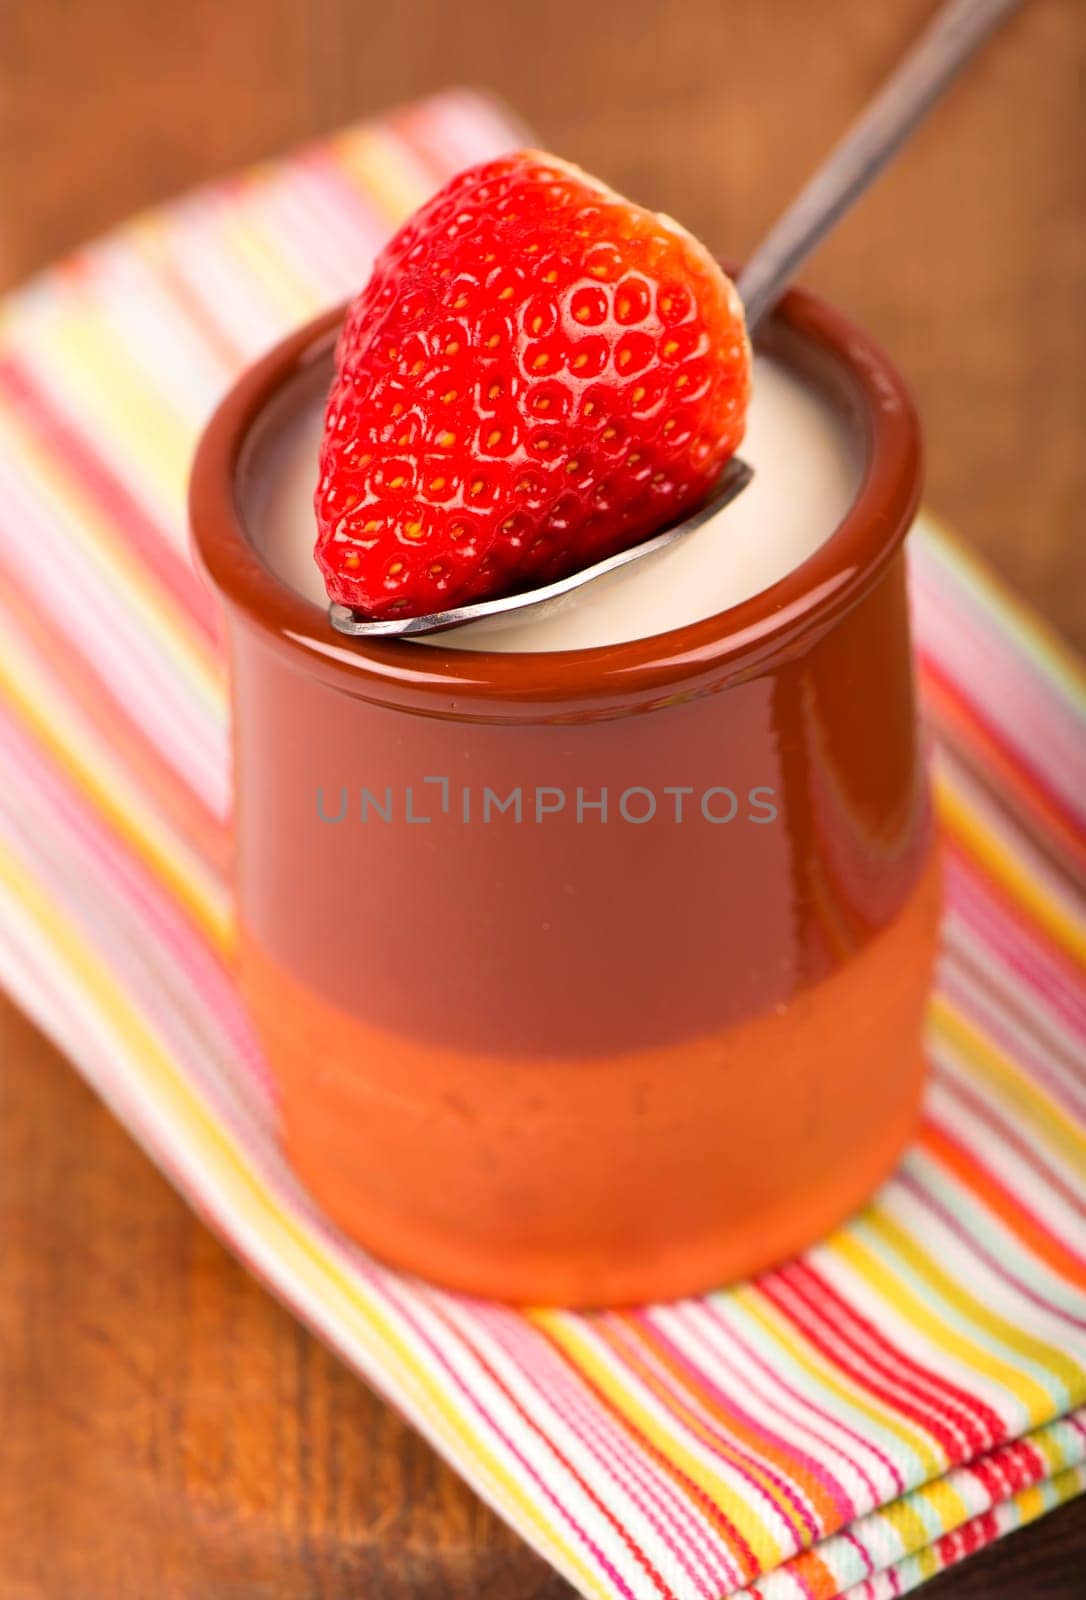 Strawberry yogurt with fresh strawberries on a wooden background by aprilphoto